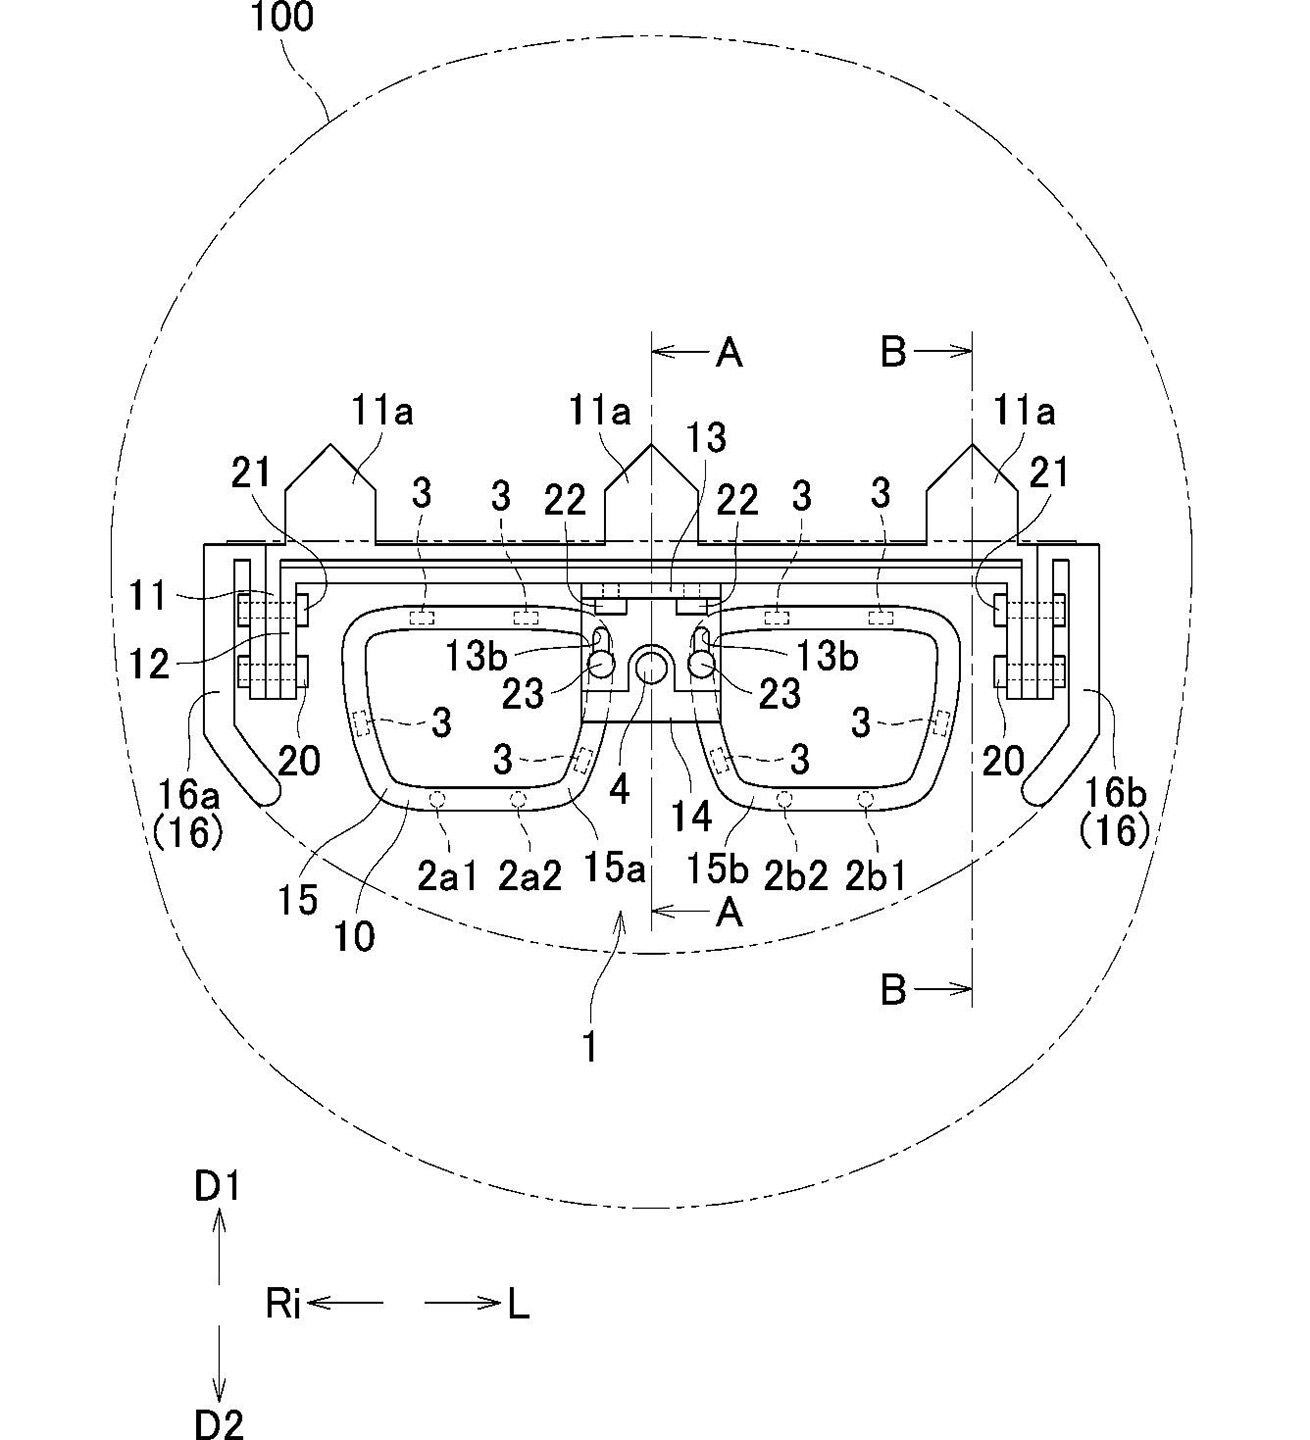 Yamaha’s current patents show a system that utilizes rider-facing cameras in addition to a passthrough view that allows the computer to overlay the info where the rider is looking in their line of sight.